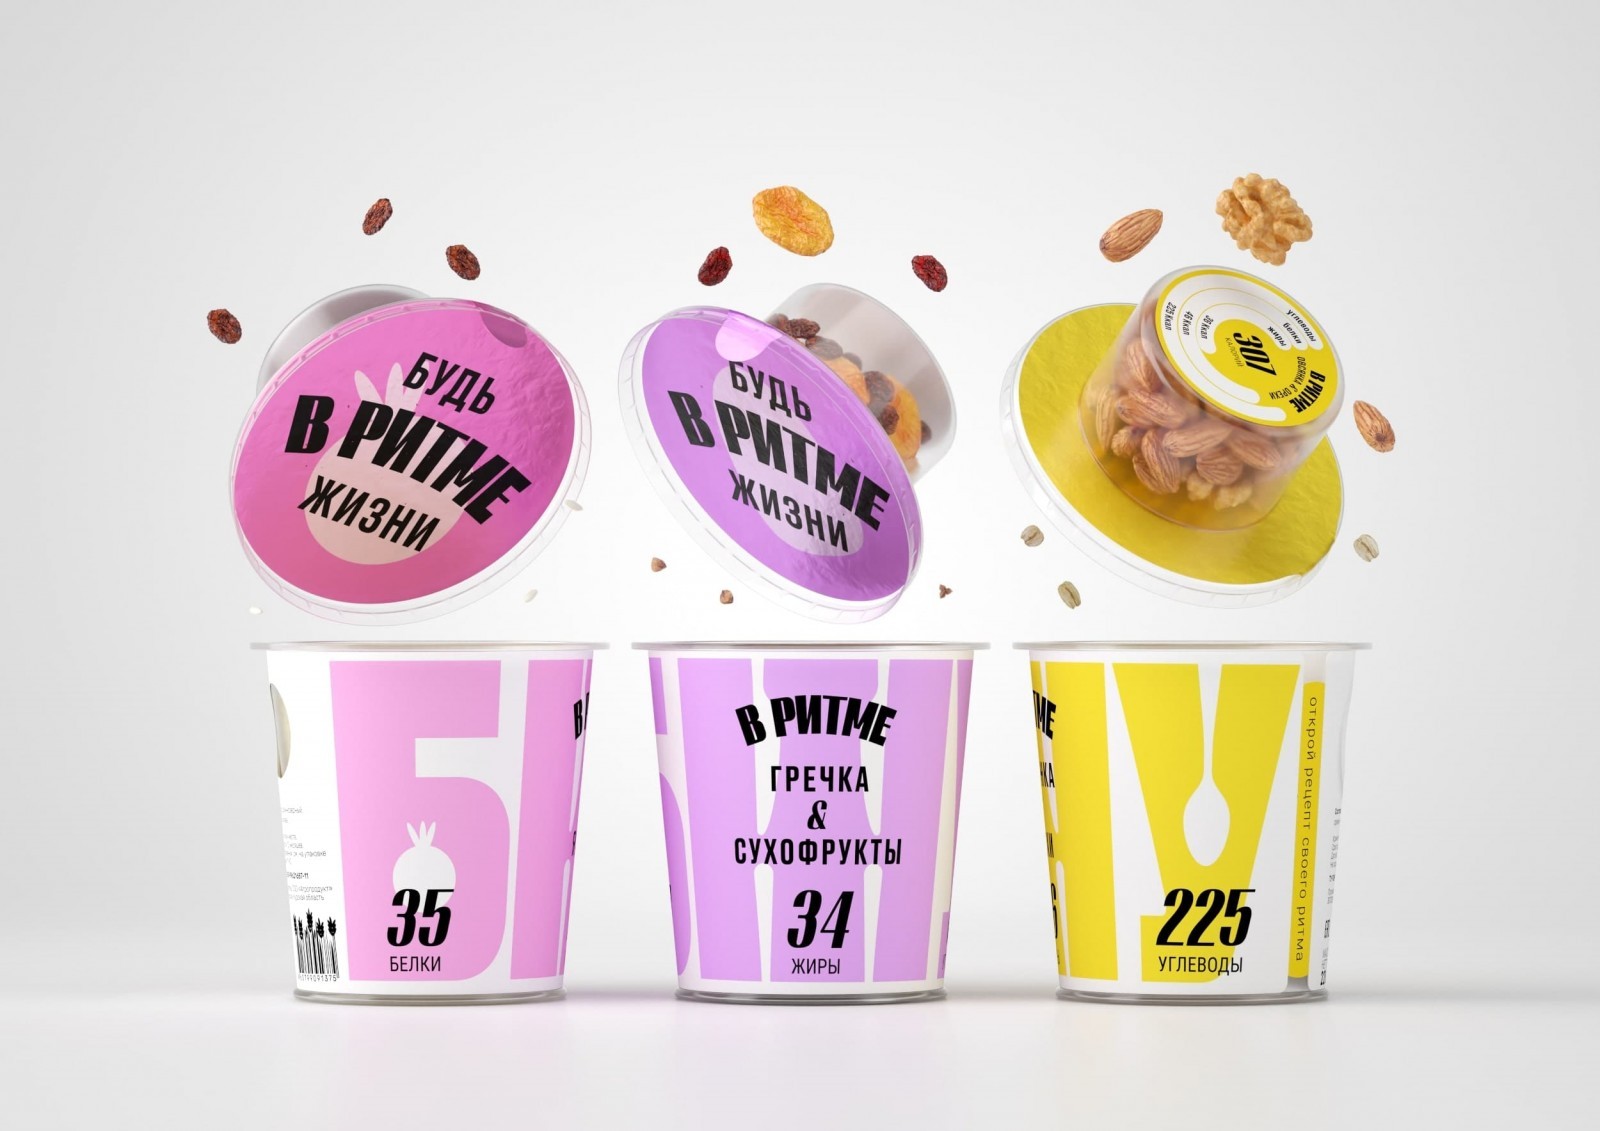 Student Packaging Design Concept for In Rhythm an Instant Diet Cereals by Repina Tatyana